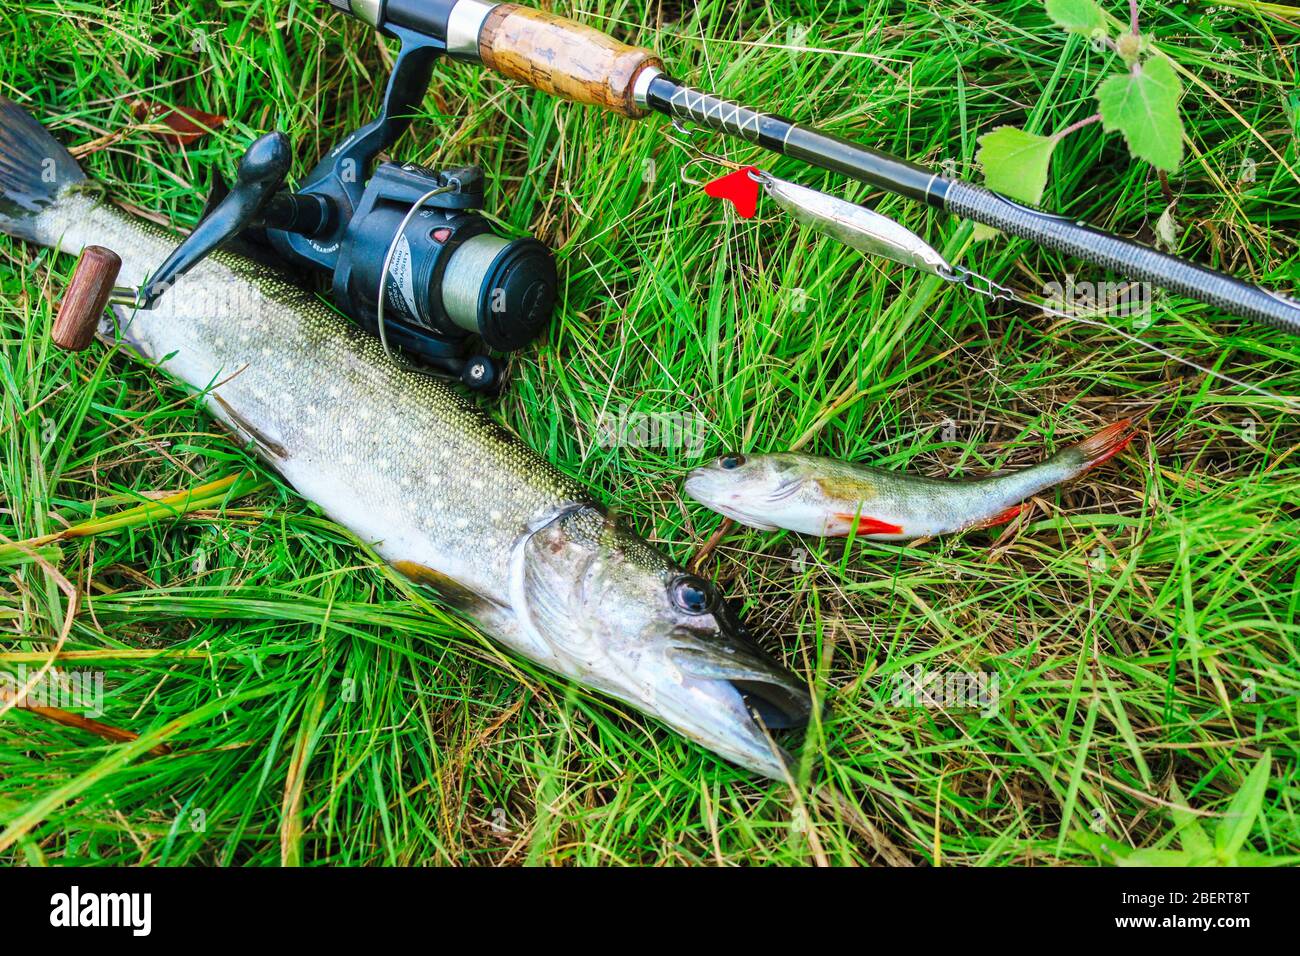 https://c8.alamy.com/comp/2BERT8T/fishing-still-life-spinning-with-spoon-and-caught-fish-on-the-grass-2BERT8T.jpg